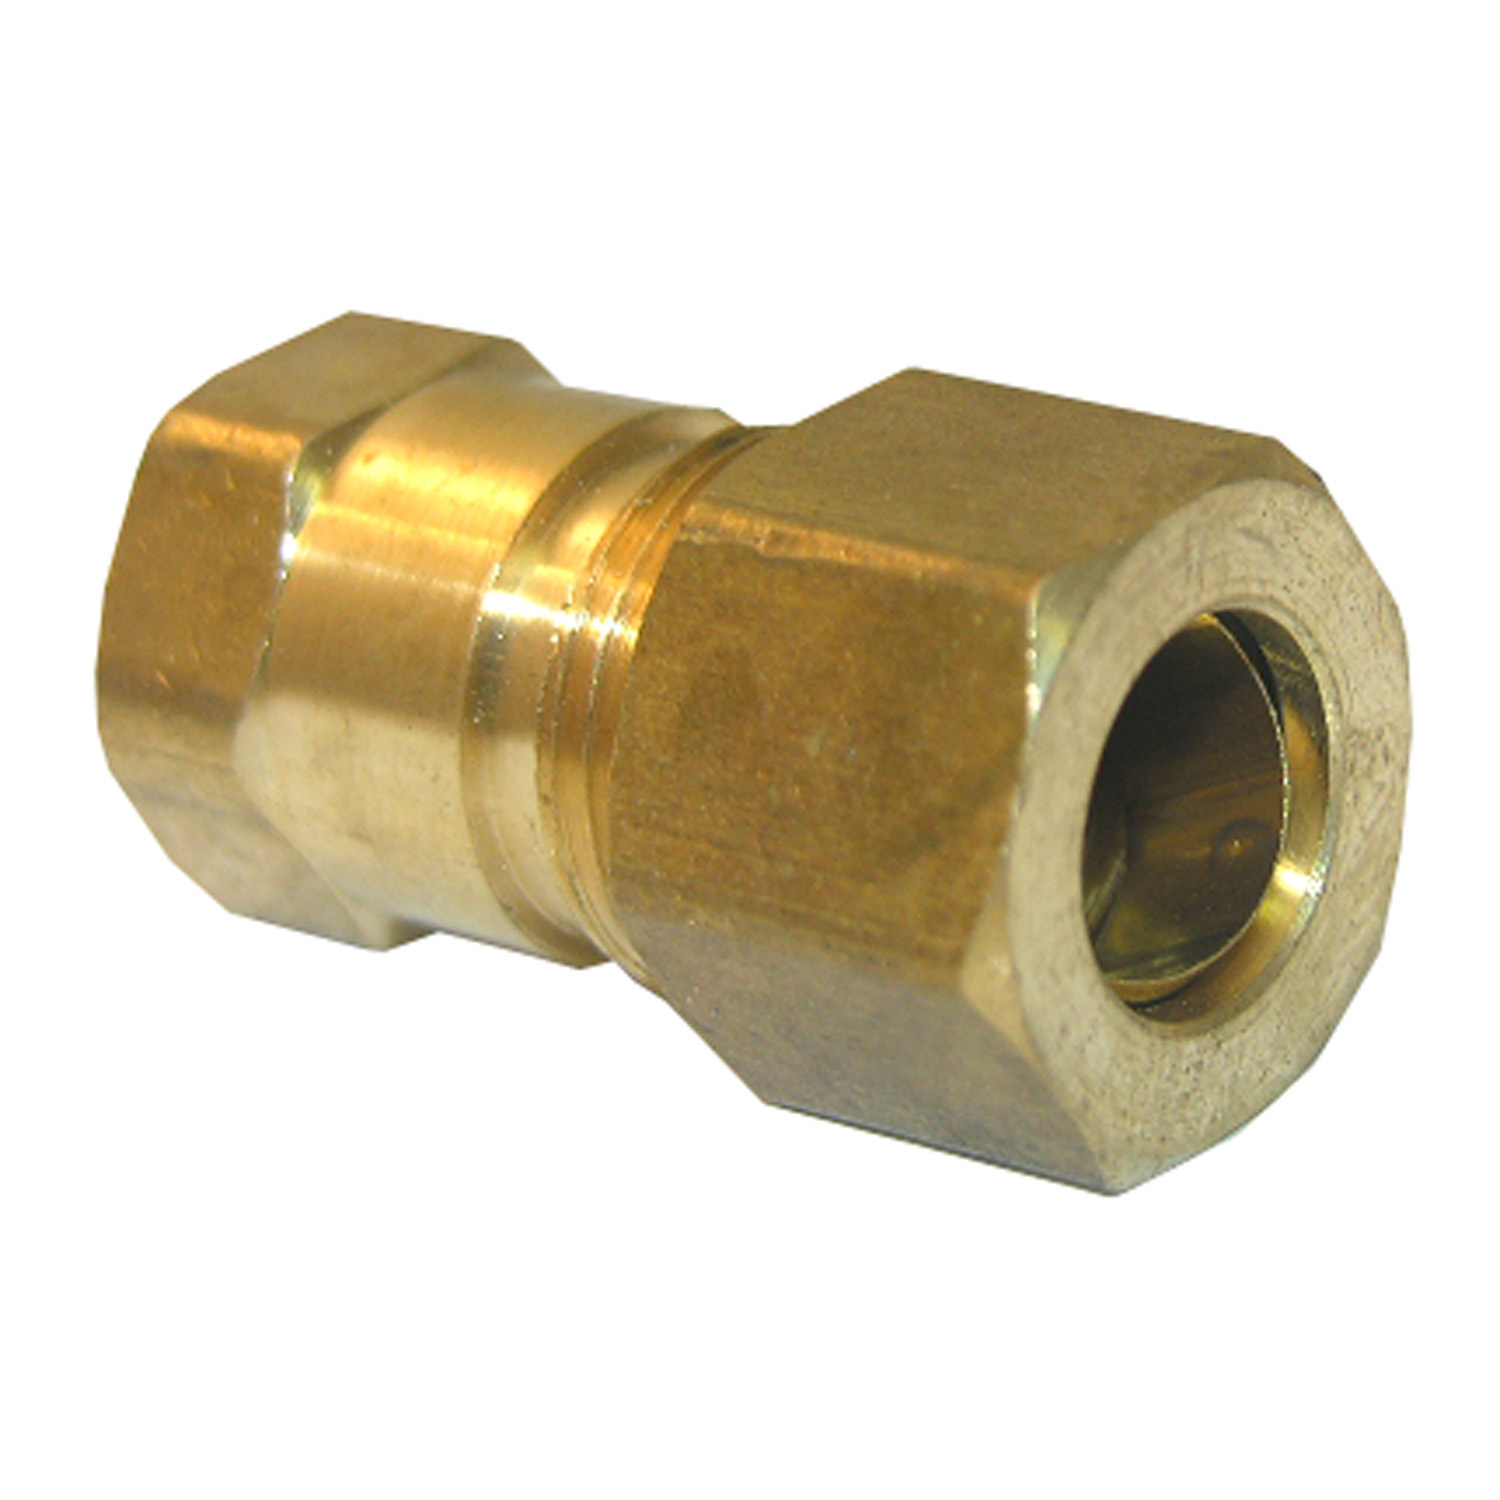 17-6631 Pipe Adapter, 3/8 x 1/8 in, Compression x FPT, Brass, 150 psi Pressure